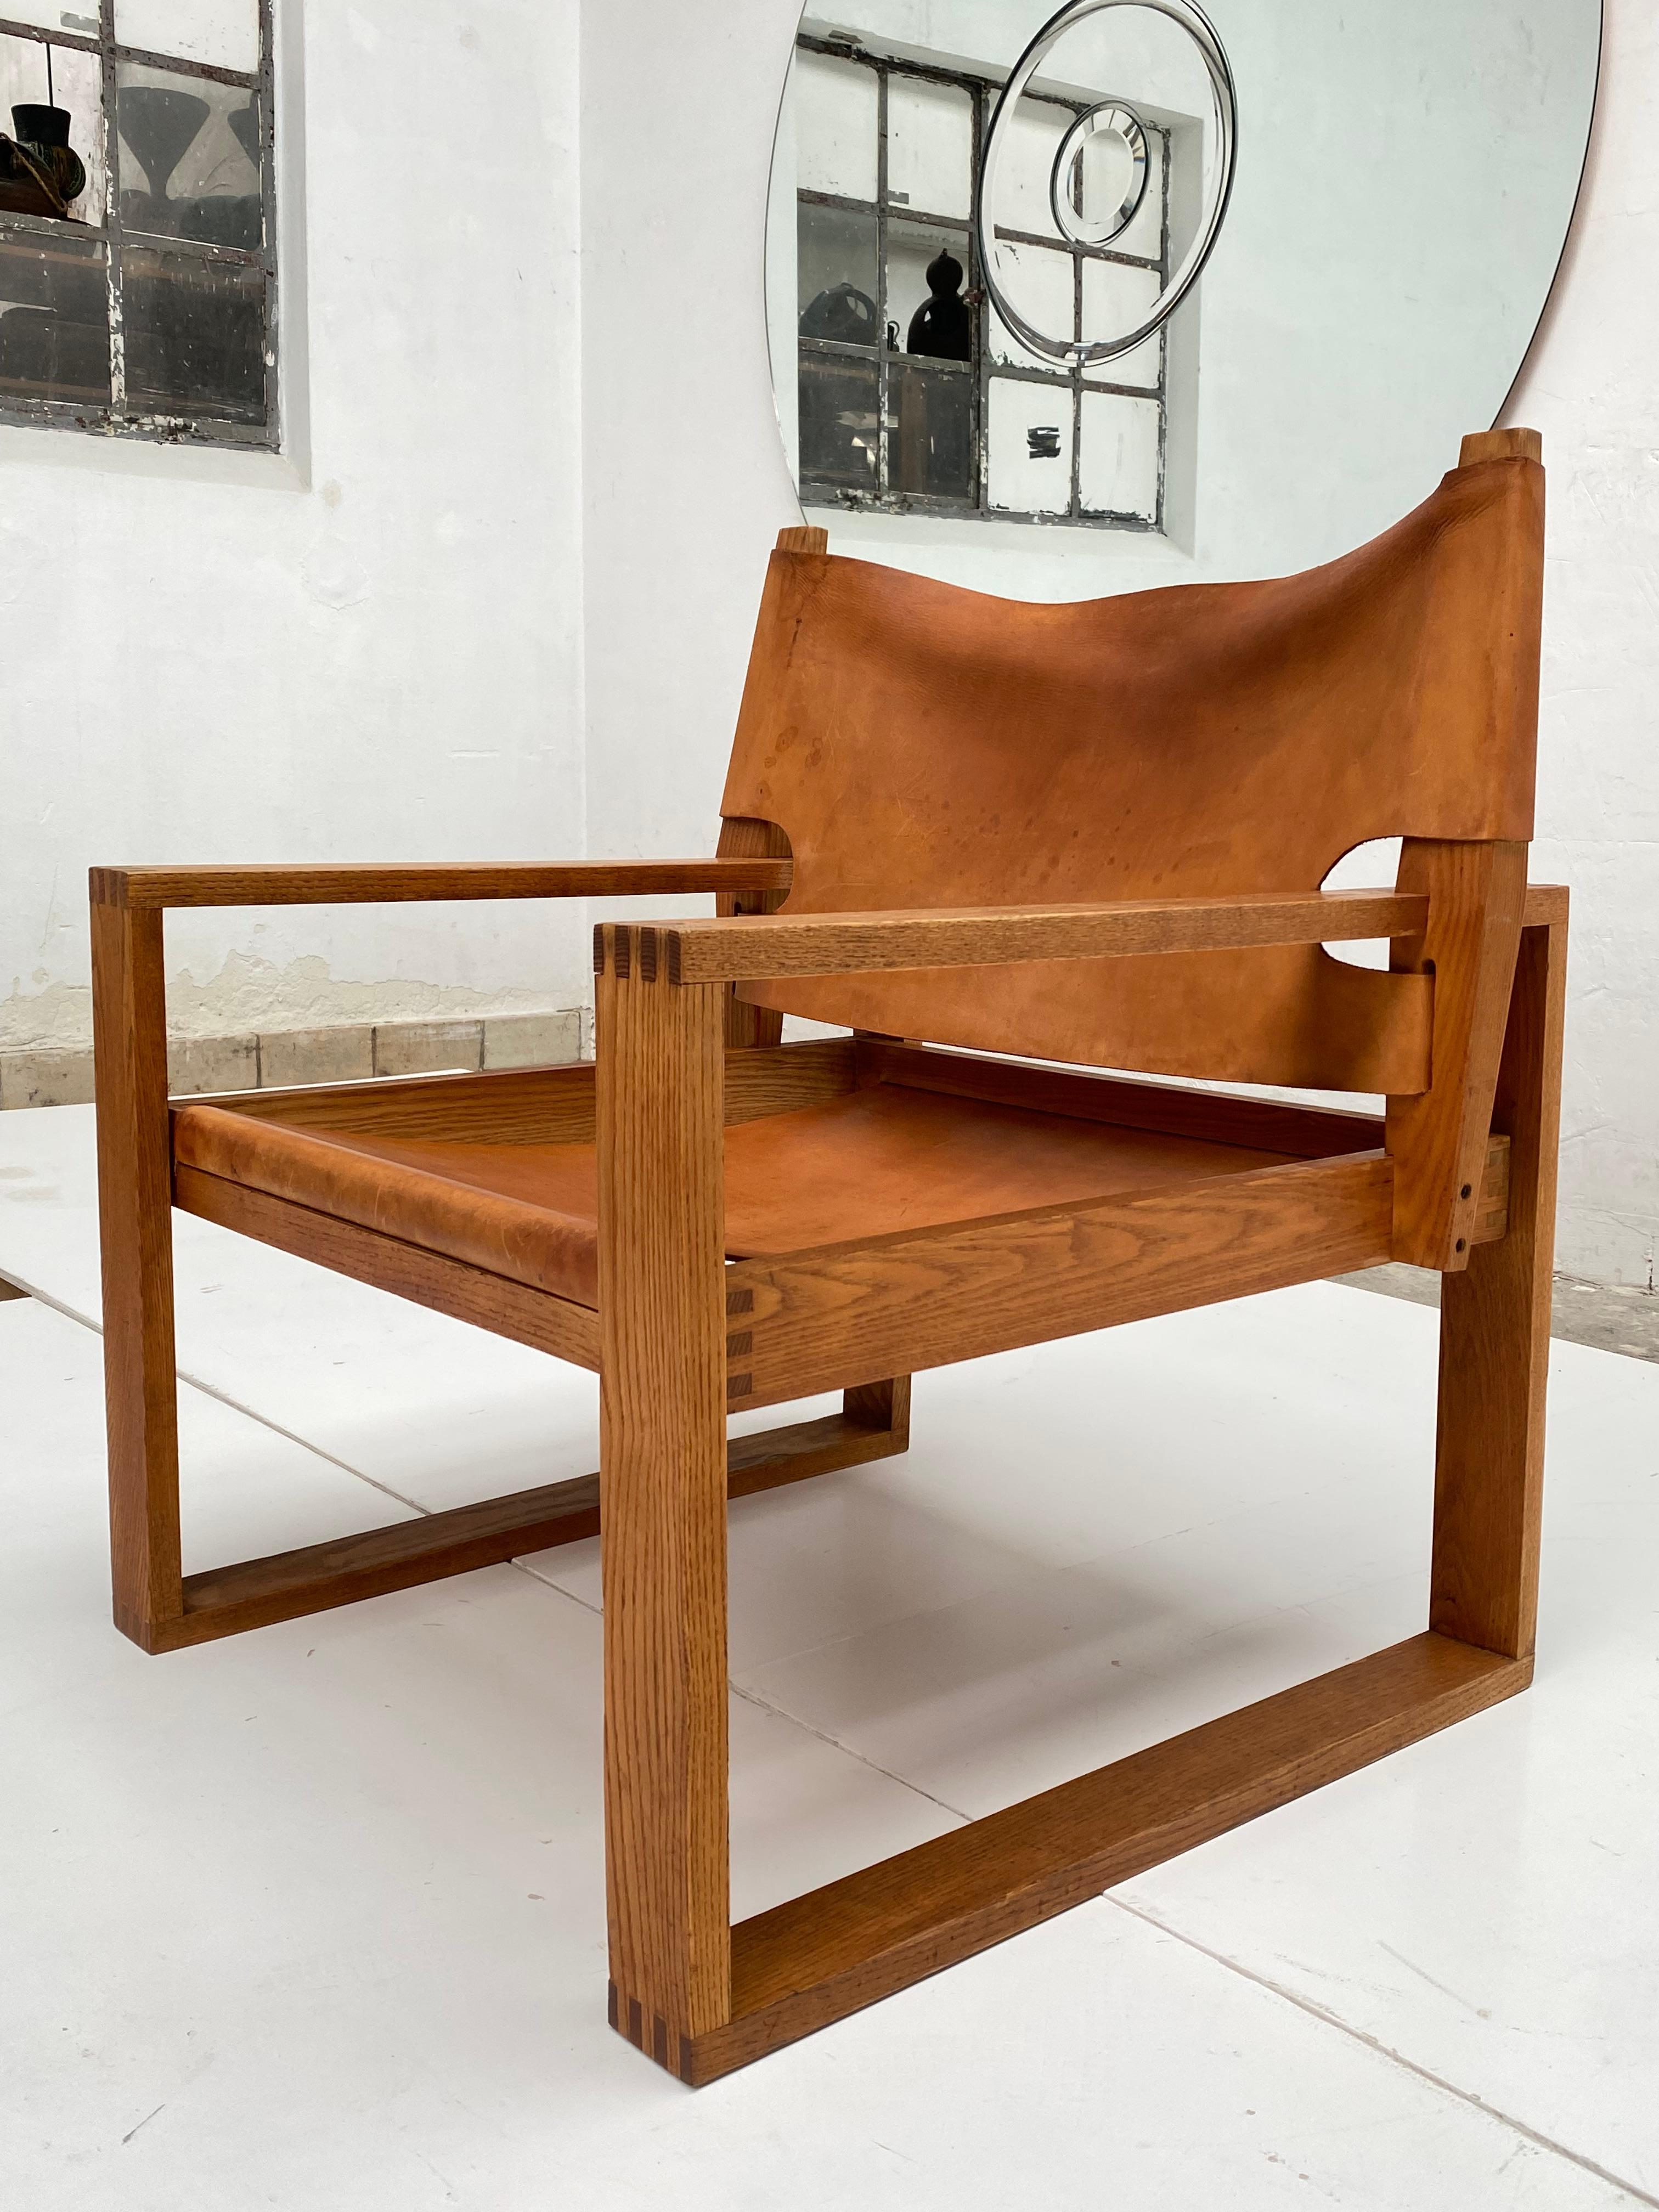 A rare Danish sled chair in oak and saddle leather designed in 1966 by Svend Fransen

Made by Hugo Frandsen in Denmark

Beautiful original patinated leather and nicely aged oak wood

High quality Danish construction and production

The original